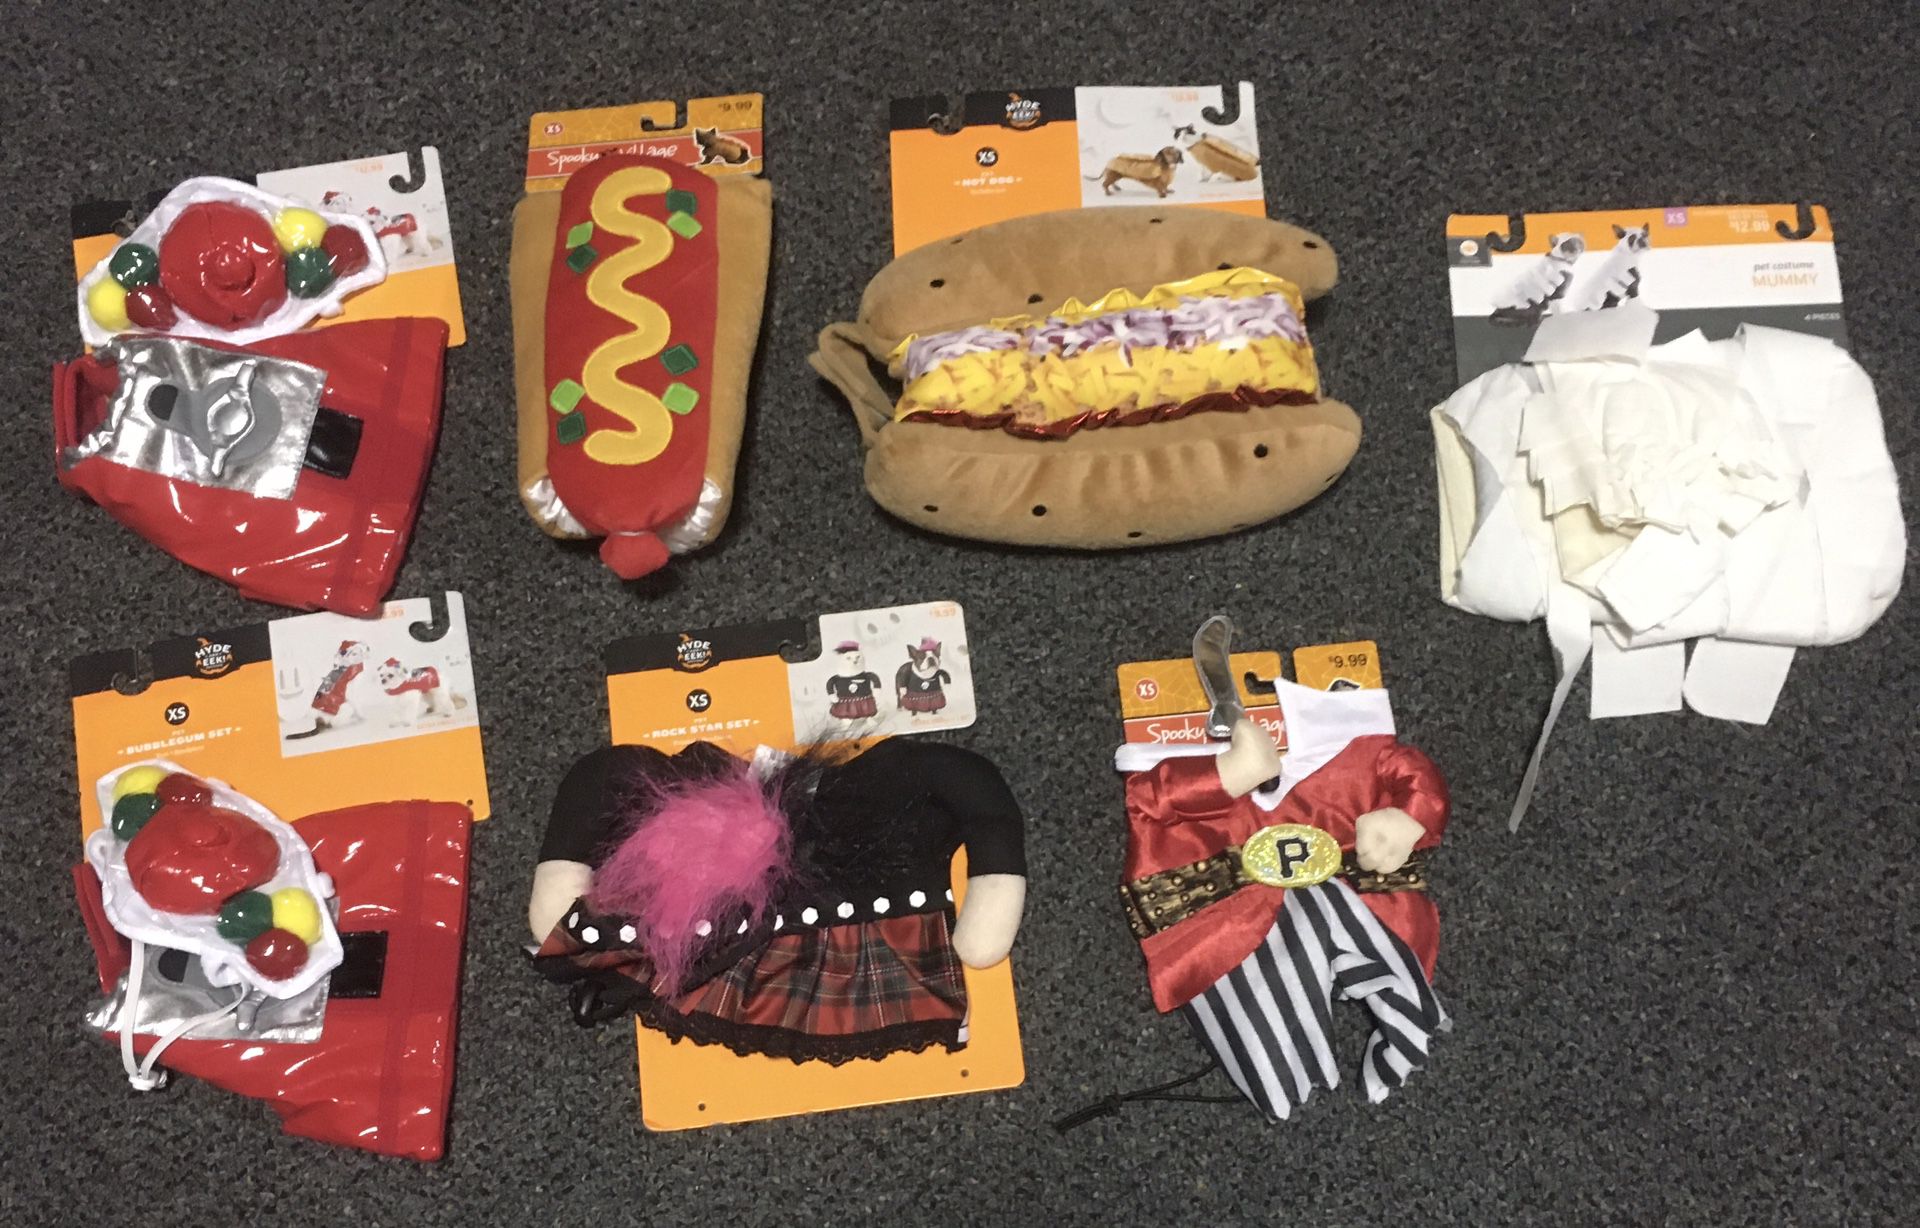 Brand new pet dog or cat size XS costumes - $5 each 